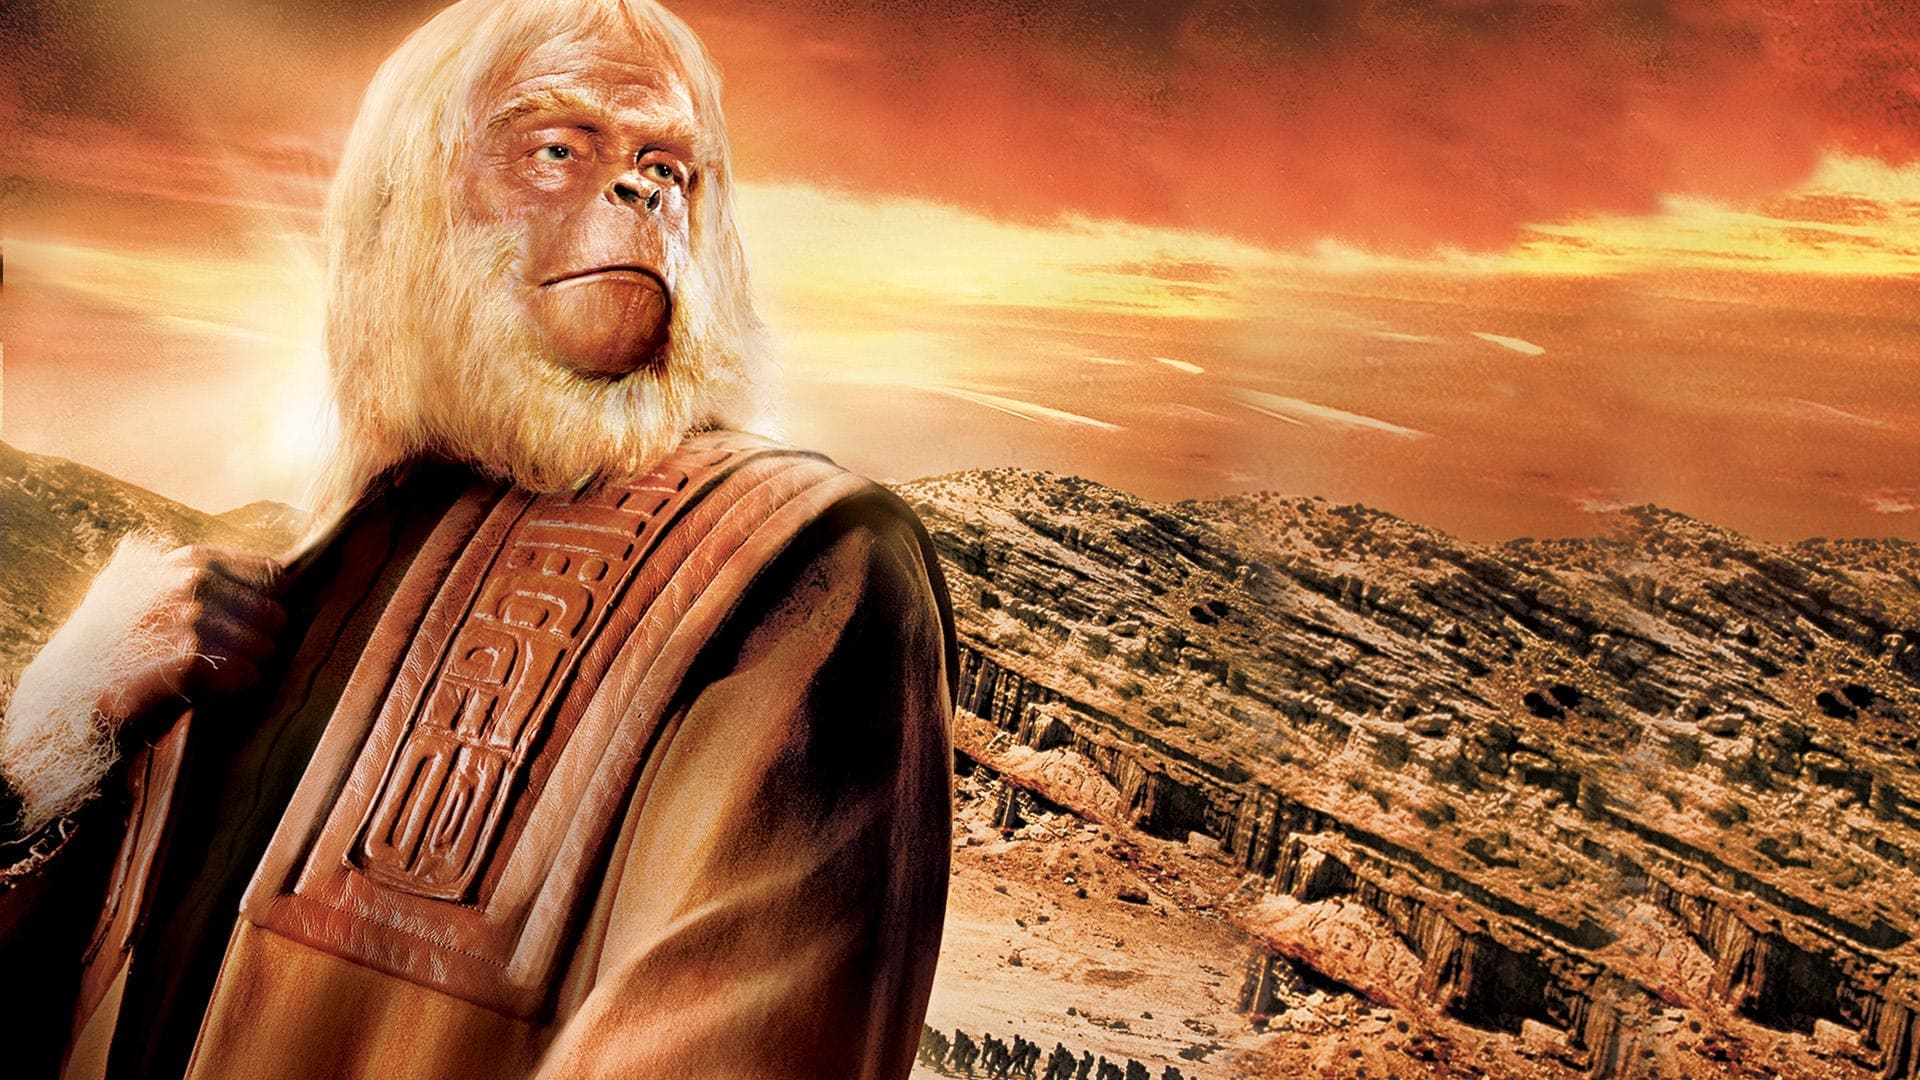 Watch Beneath the Planet of the Apes Online | Stream Full Movies